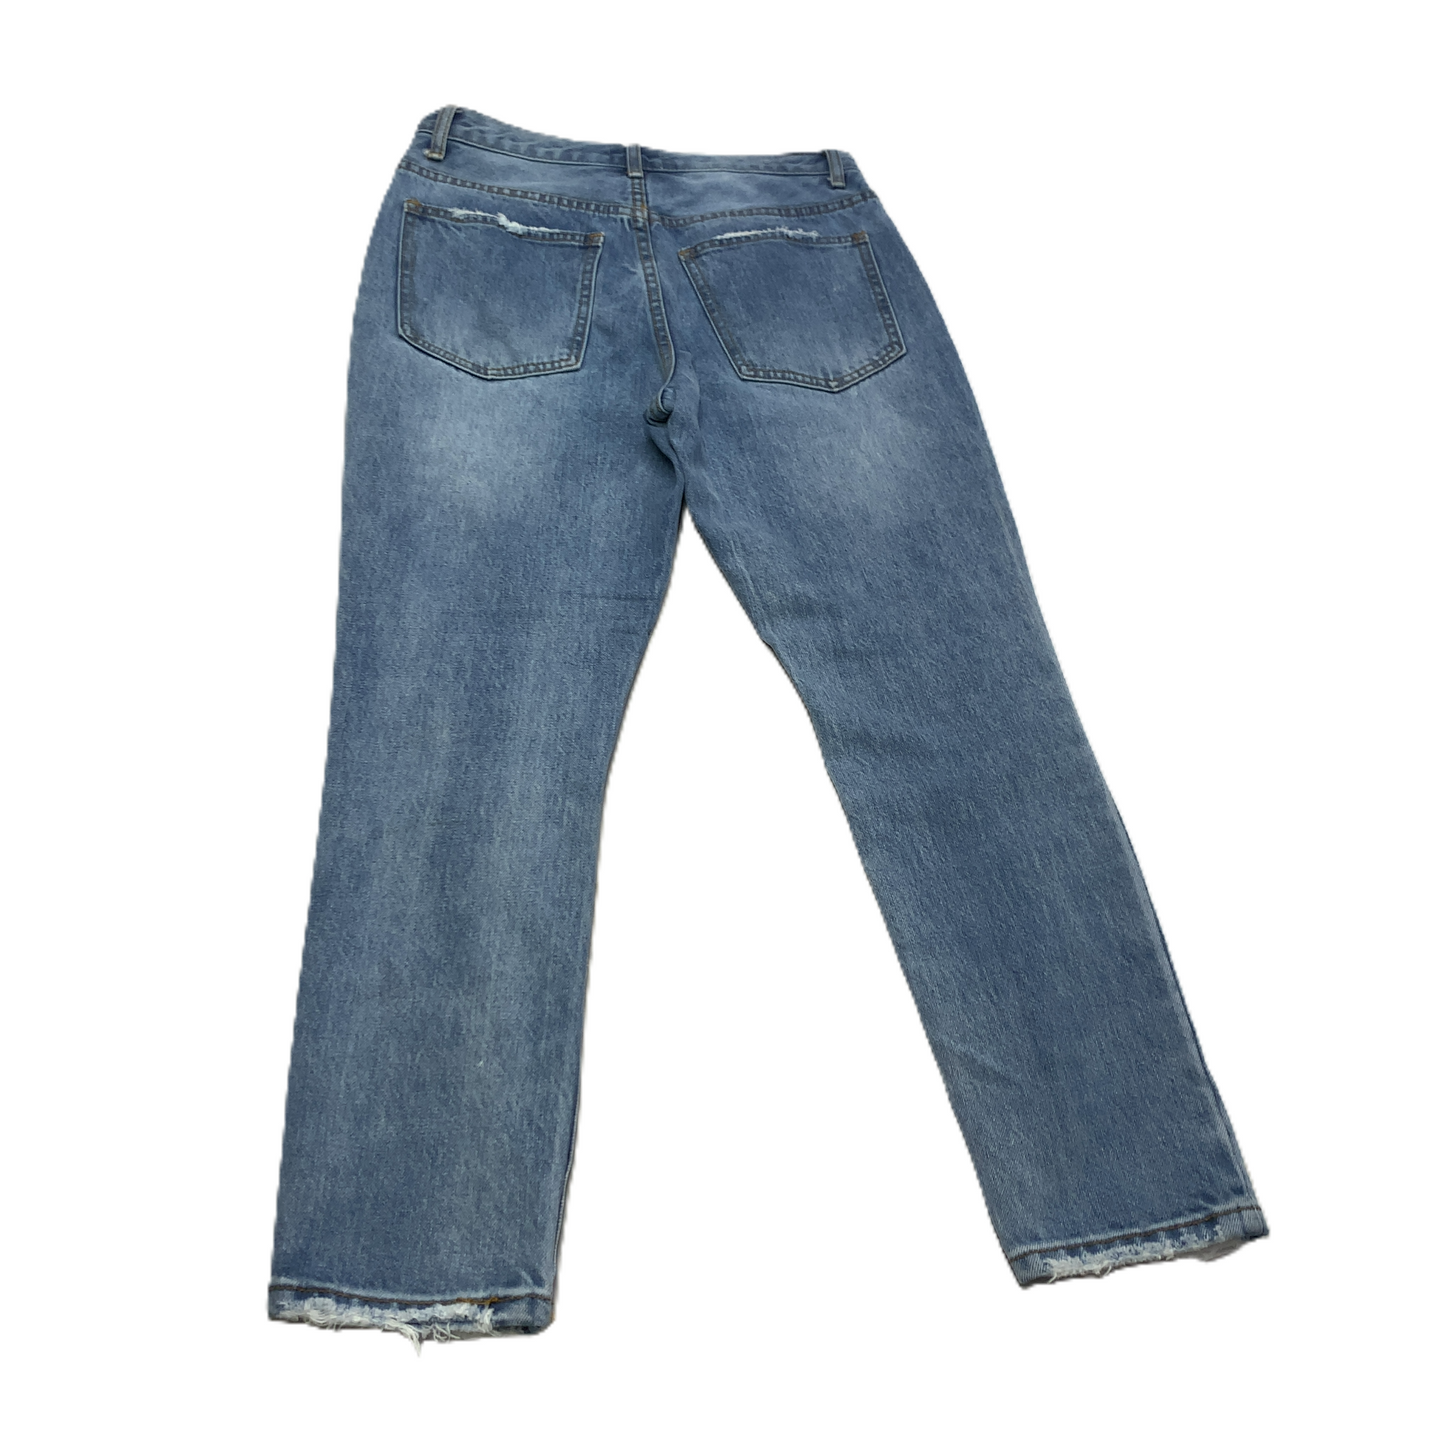 Jeans Relaxed/boyfriend By By The Way  Size: 6